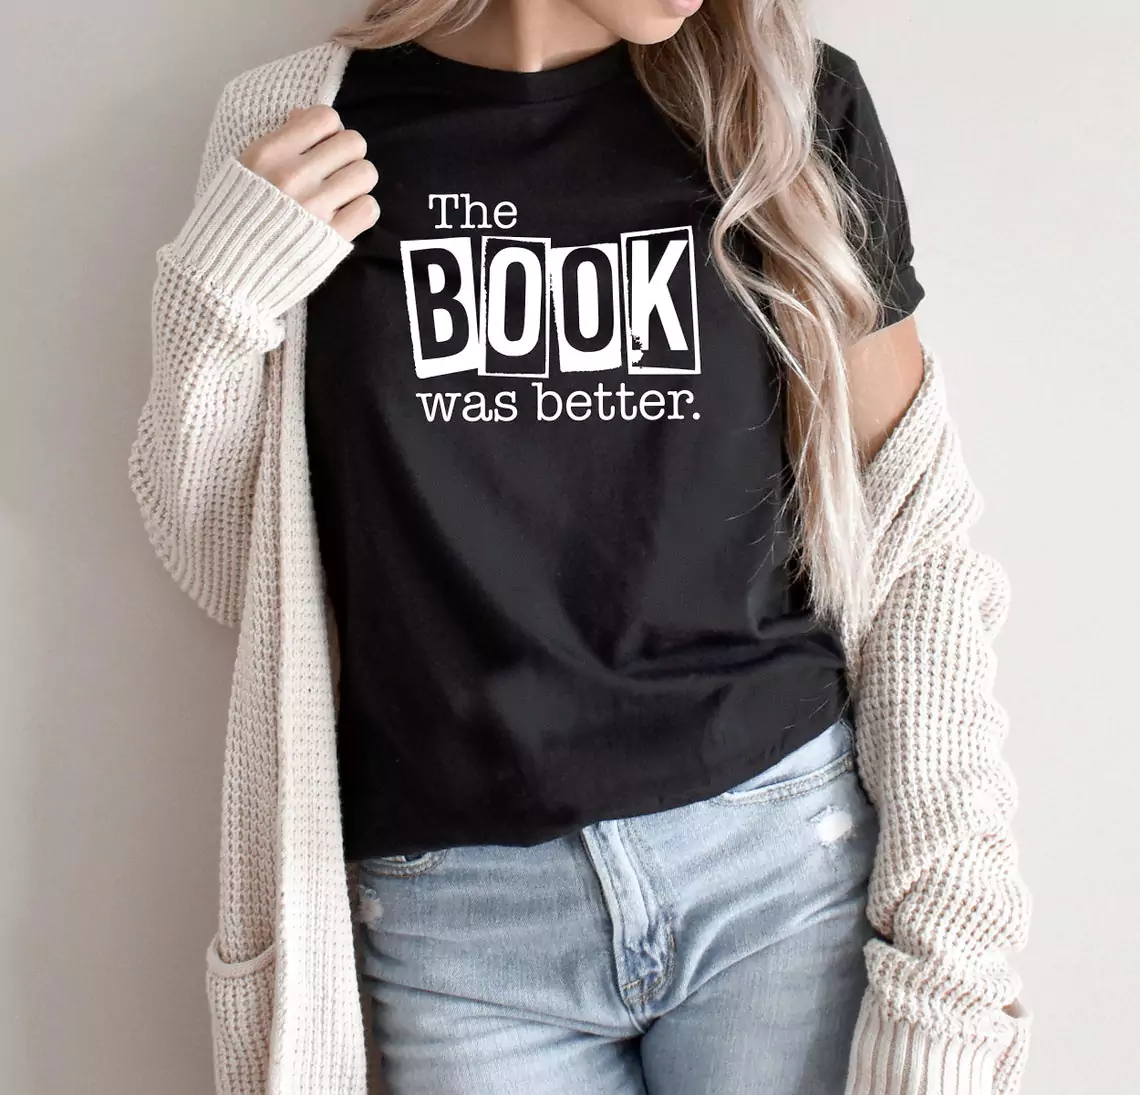 the book was better t shirt black color design1 for woman